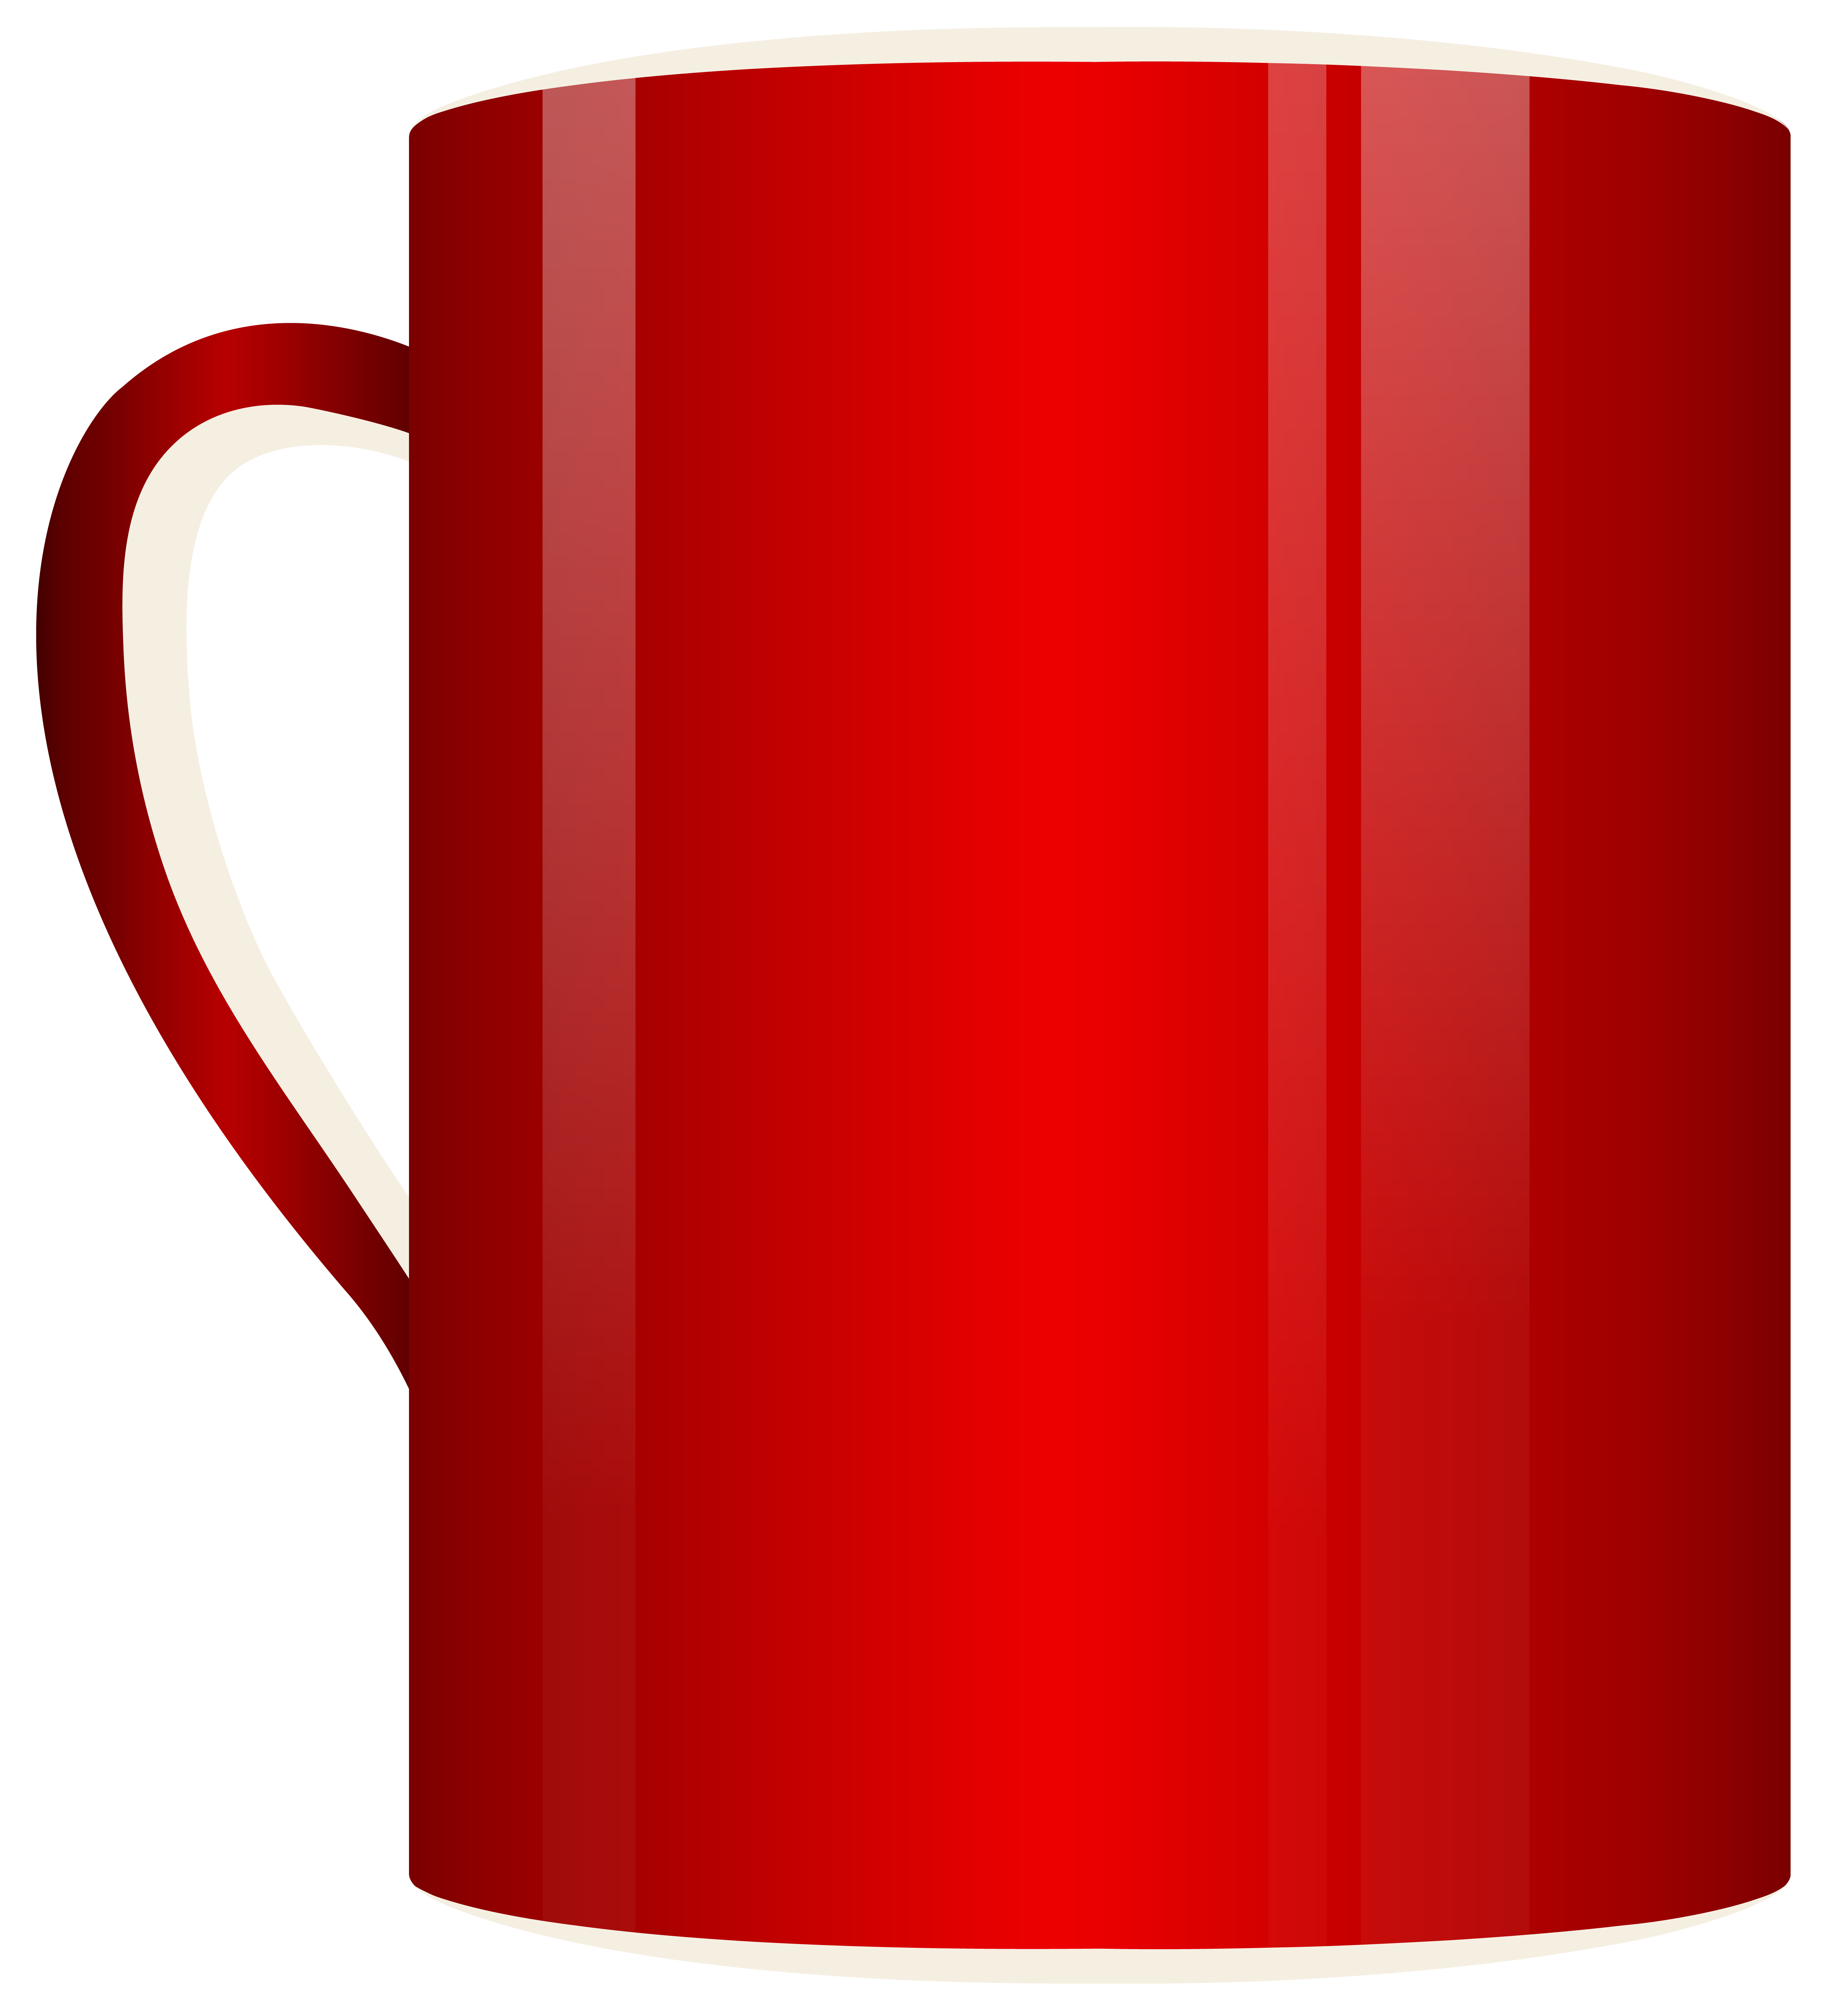 Clipart cup purple cup. Red png best web